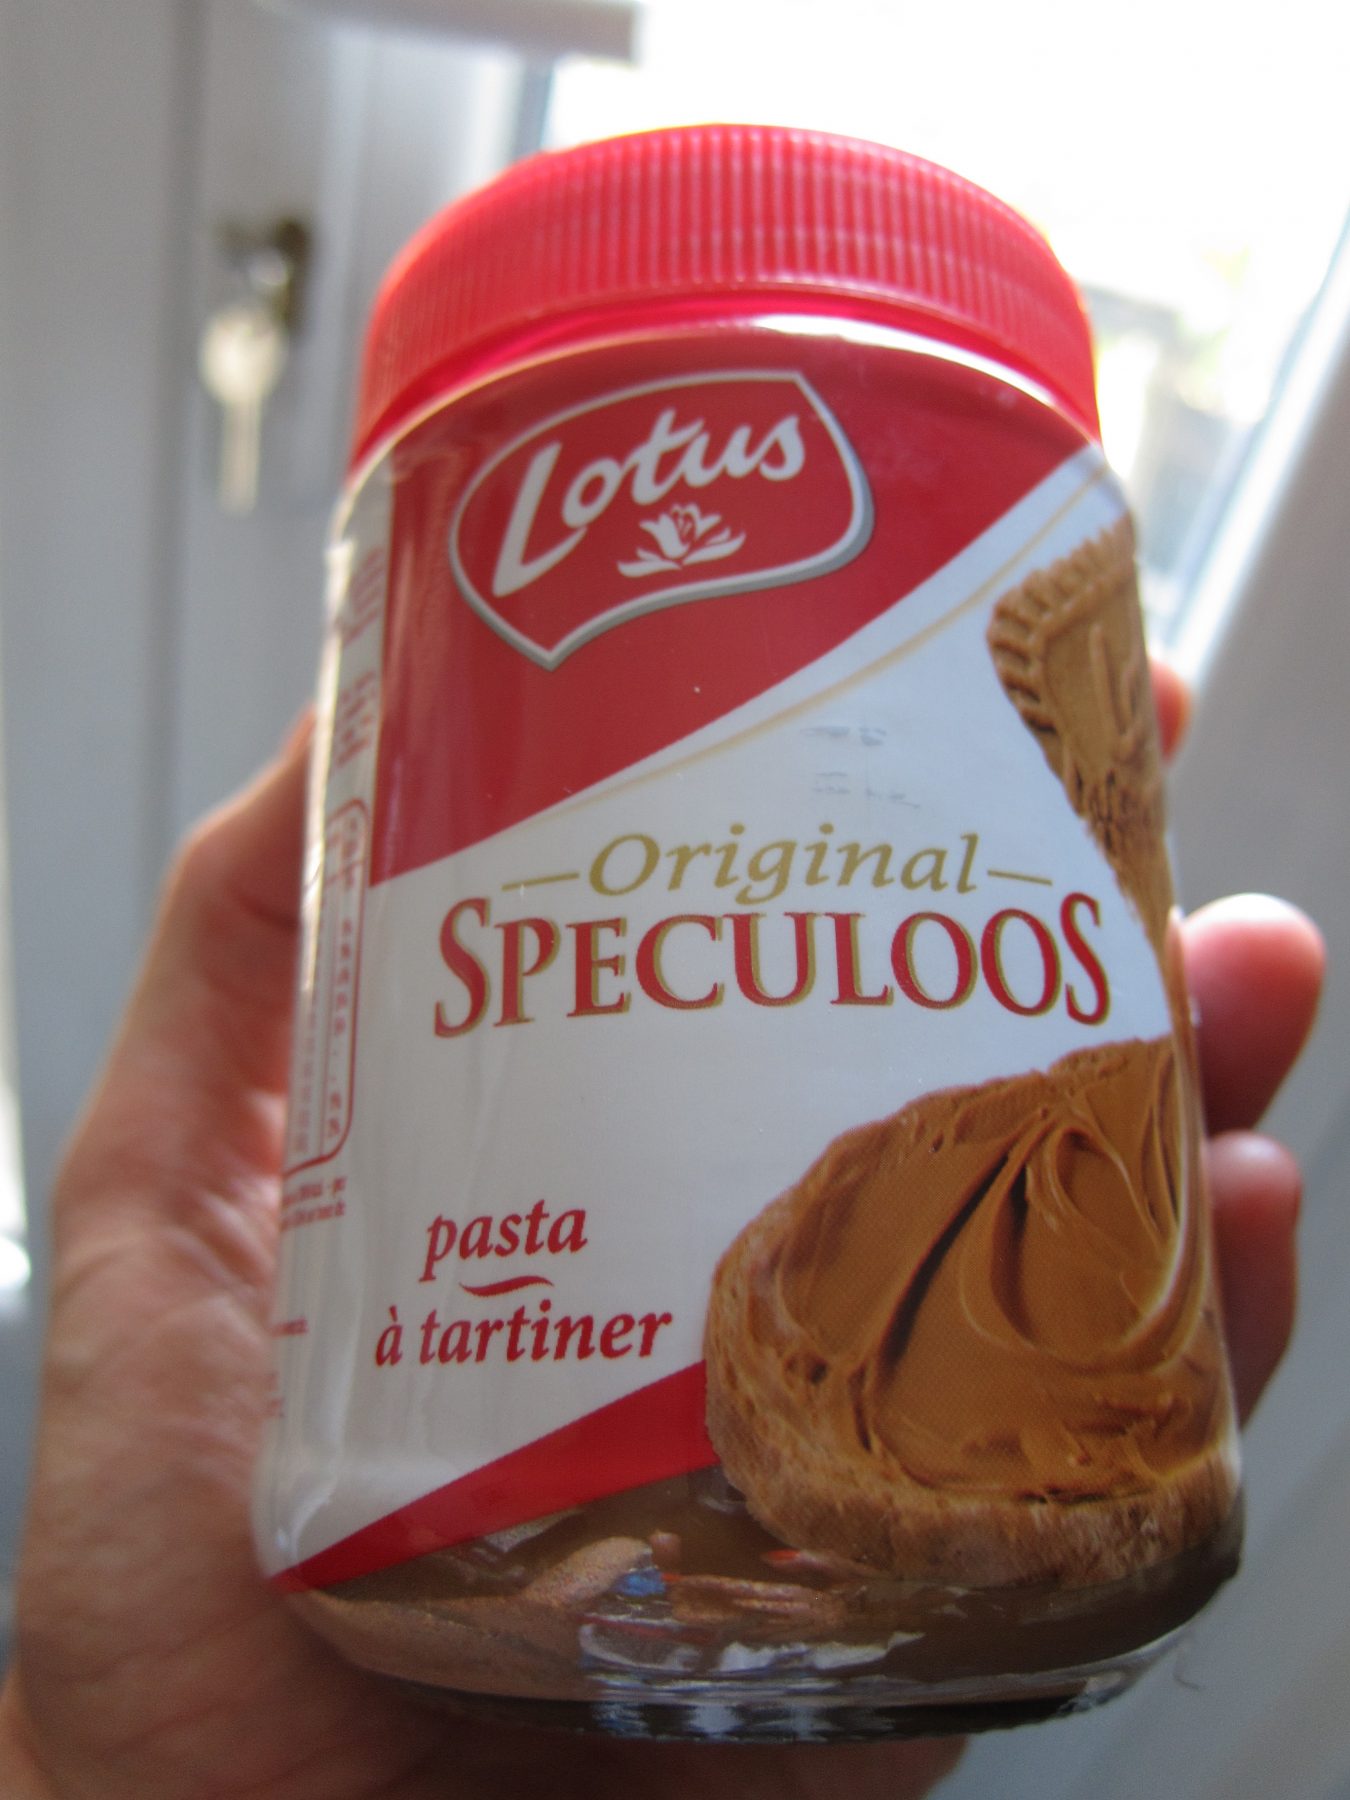 What Is Speculoos?